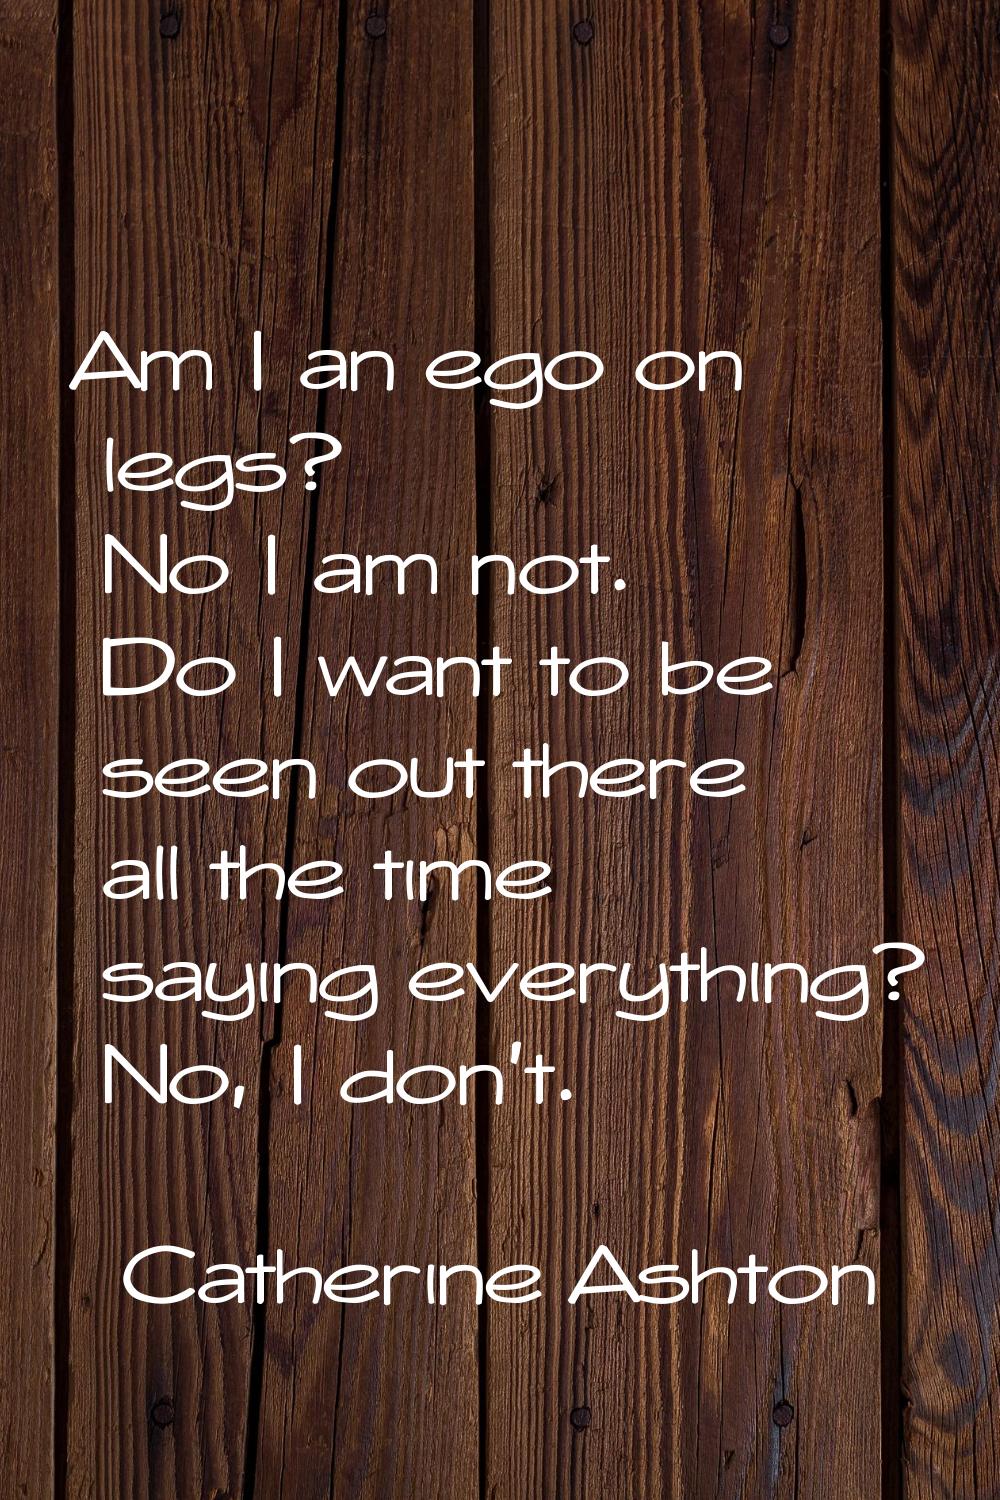 Am I an ego on legs? No I am not. Do I want to be seen out there all the time saying everything? No